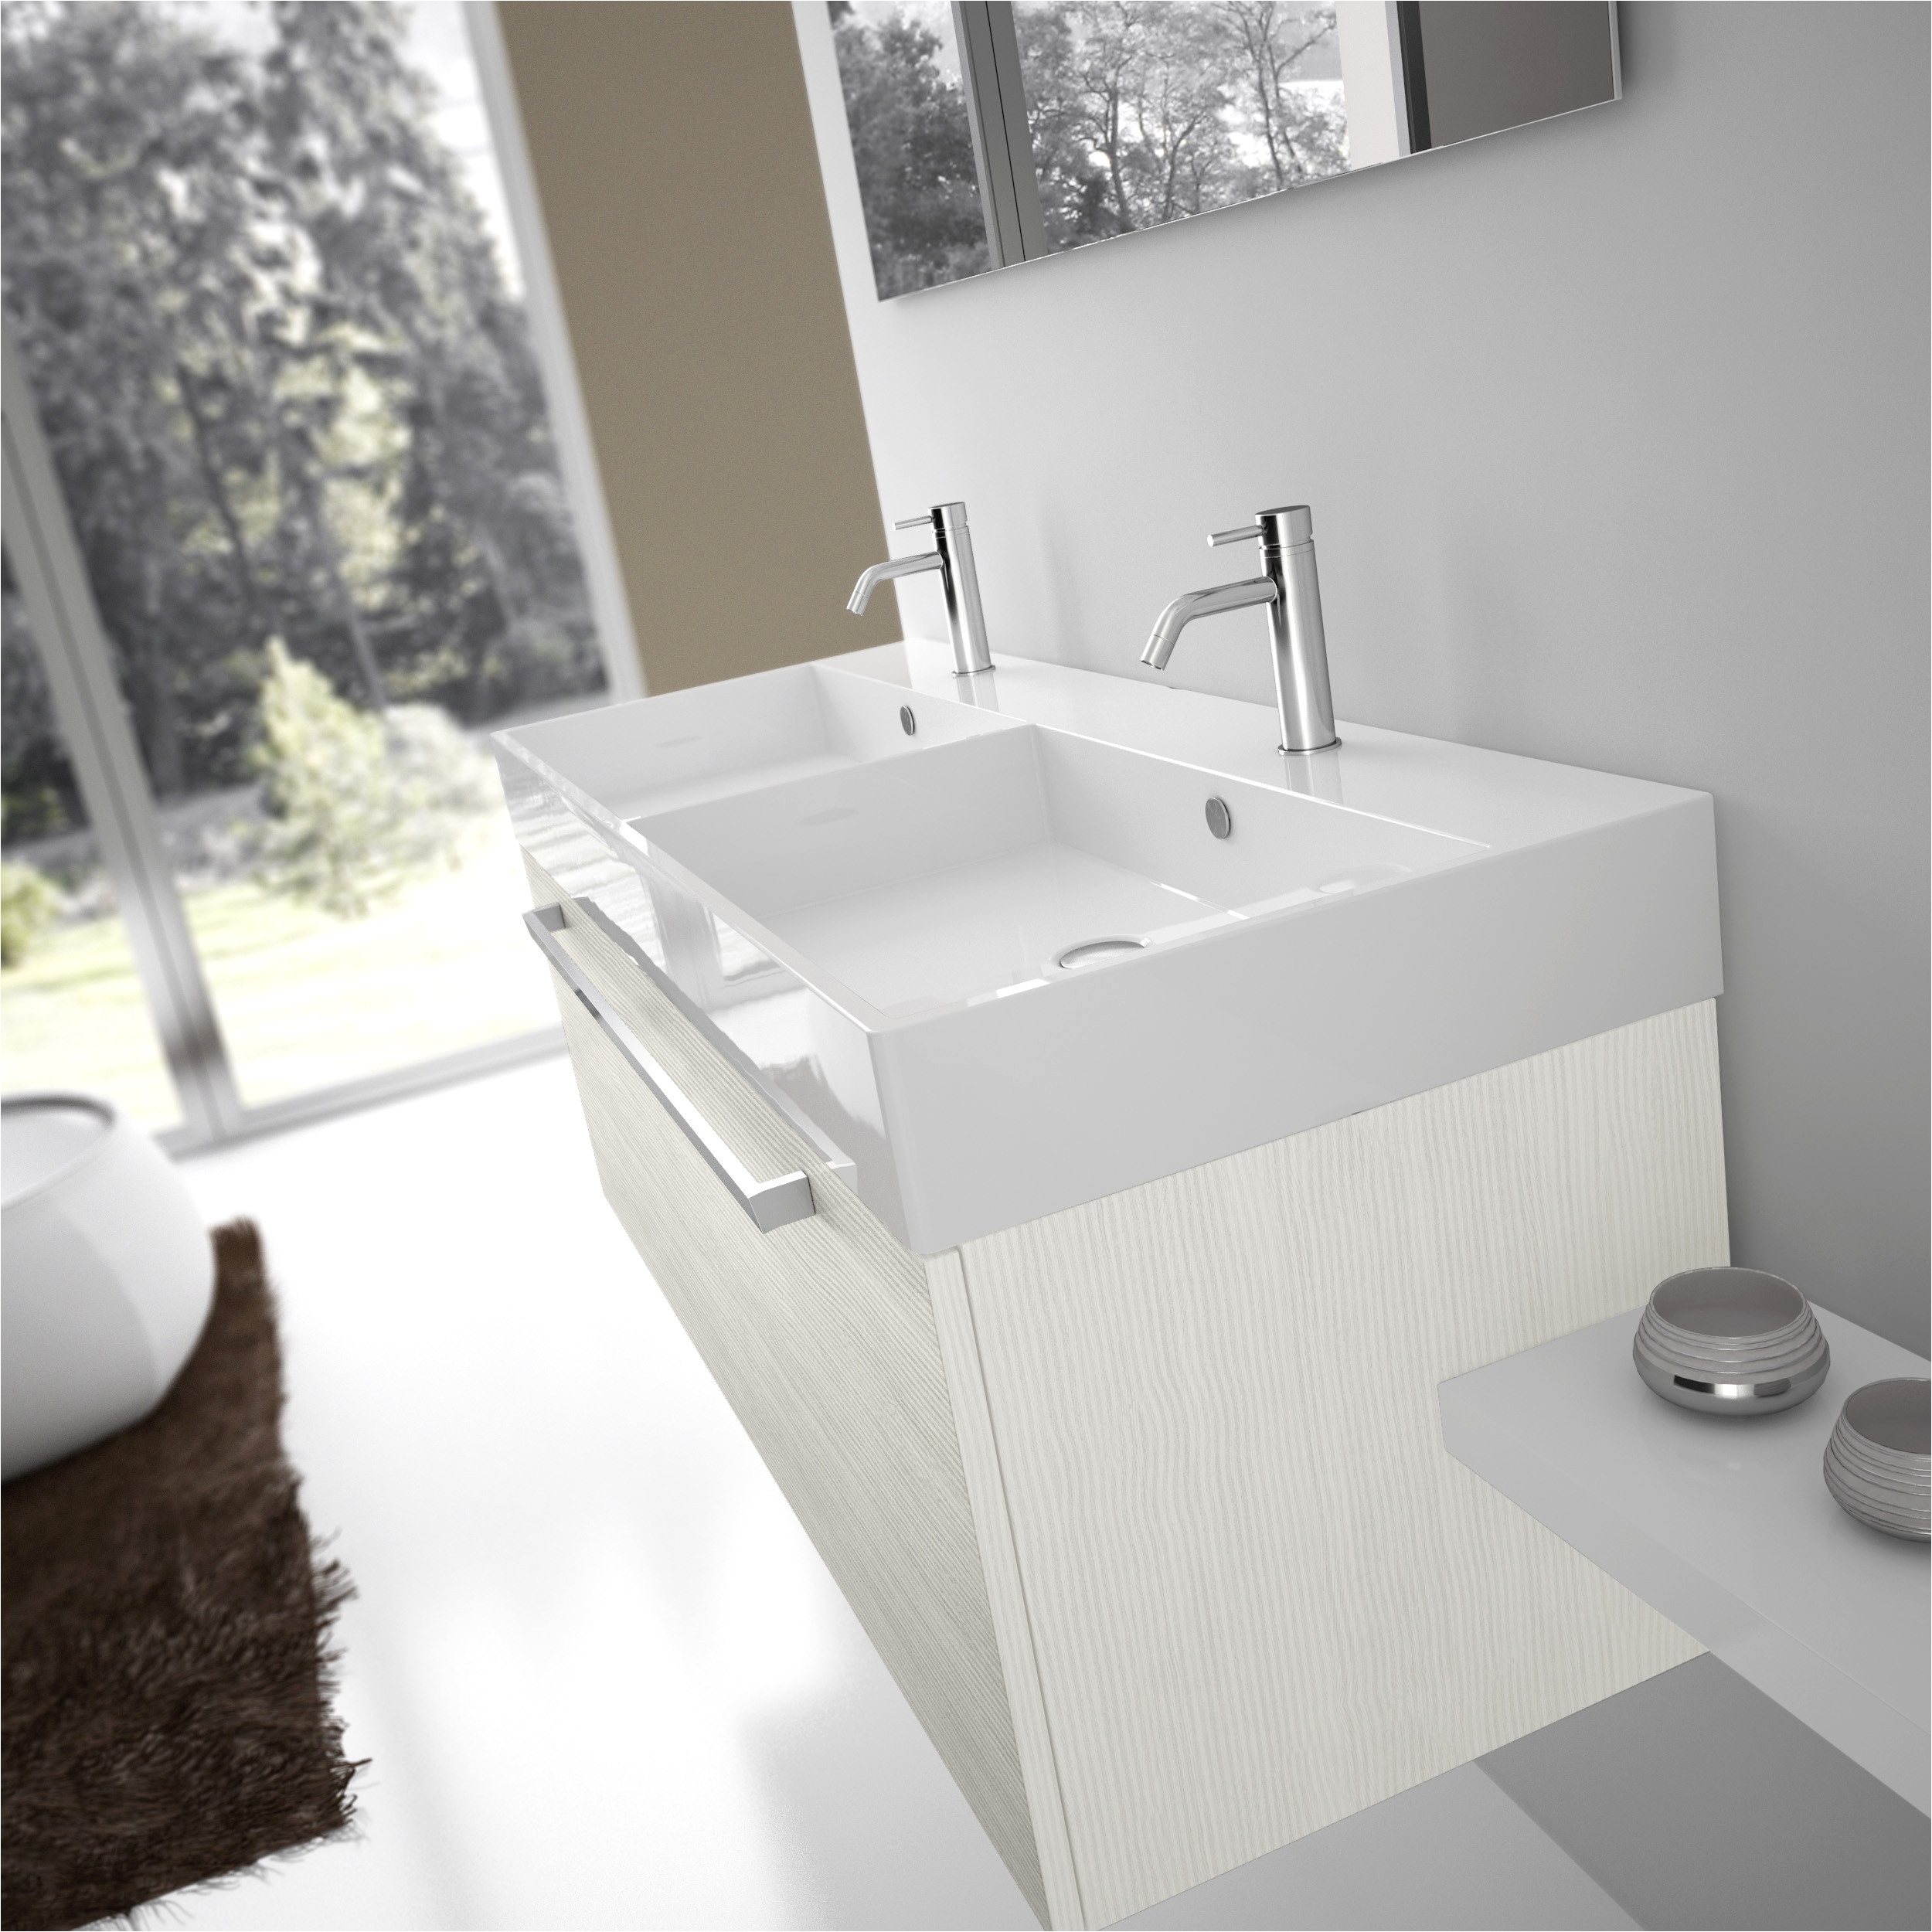 Interesting Bathroom Counter Ideas And Two Sink Bathroom Designs New H Sink New Bathroom I 0d